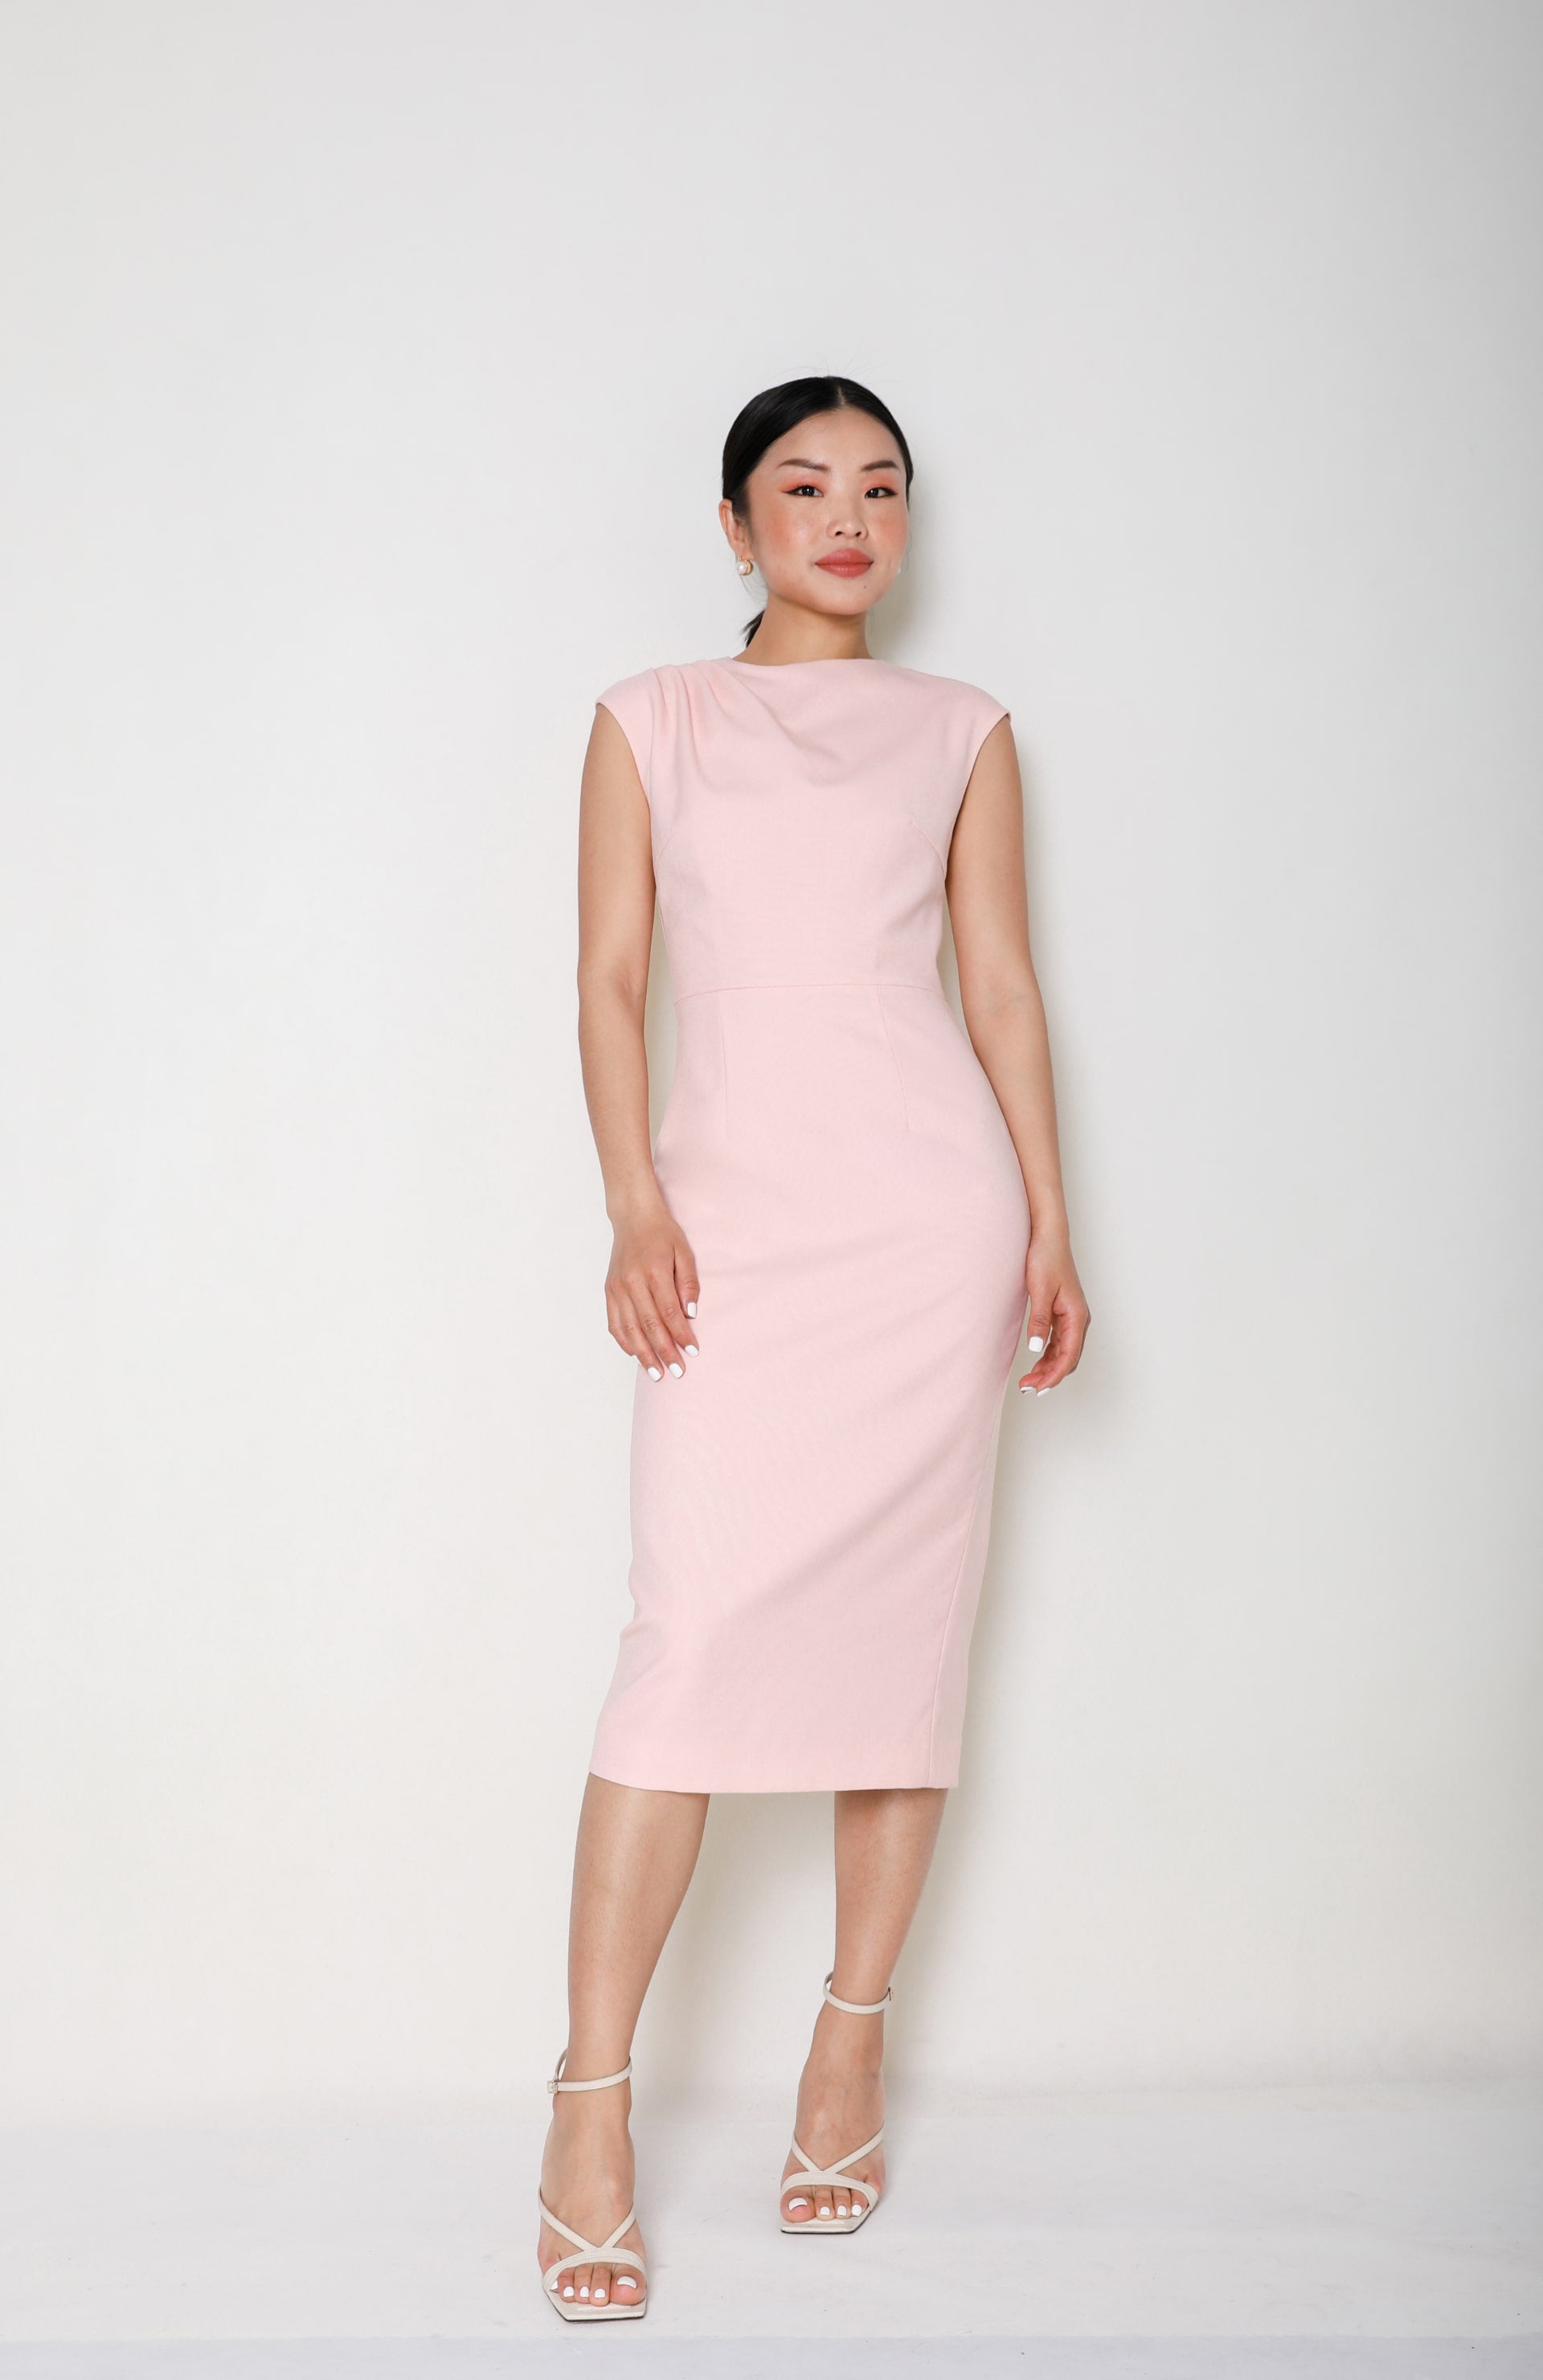 Full-length portrait of Sense By Mei's founder, draped in an elegant pink Cheongsam gown, showcasing the grace and vision of the brand's leadership.